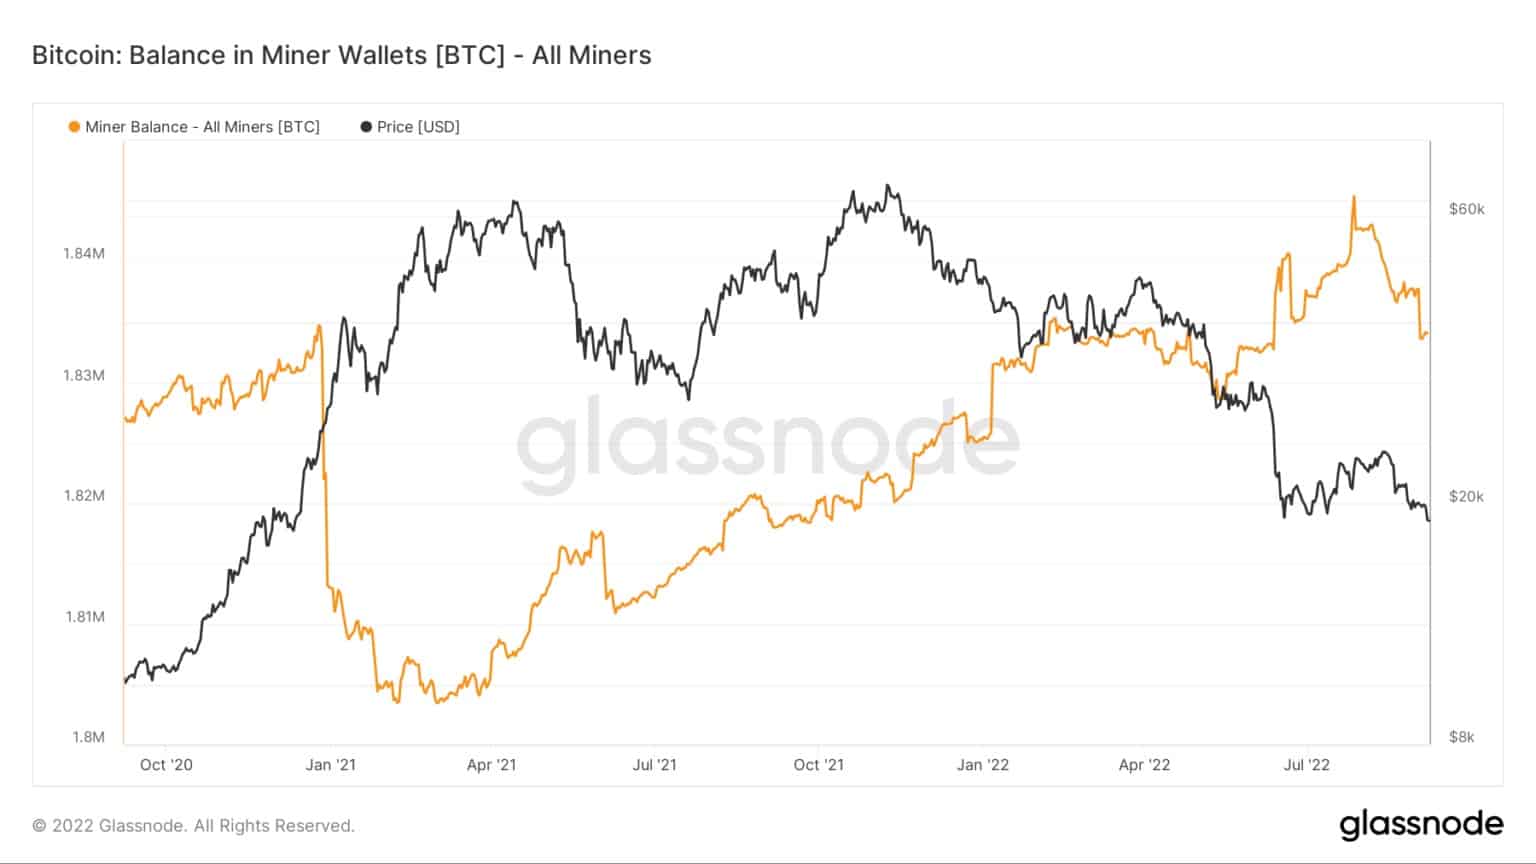 Graph showing the Bitcoin balance in miner wallets (Source: Glassnode)